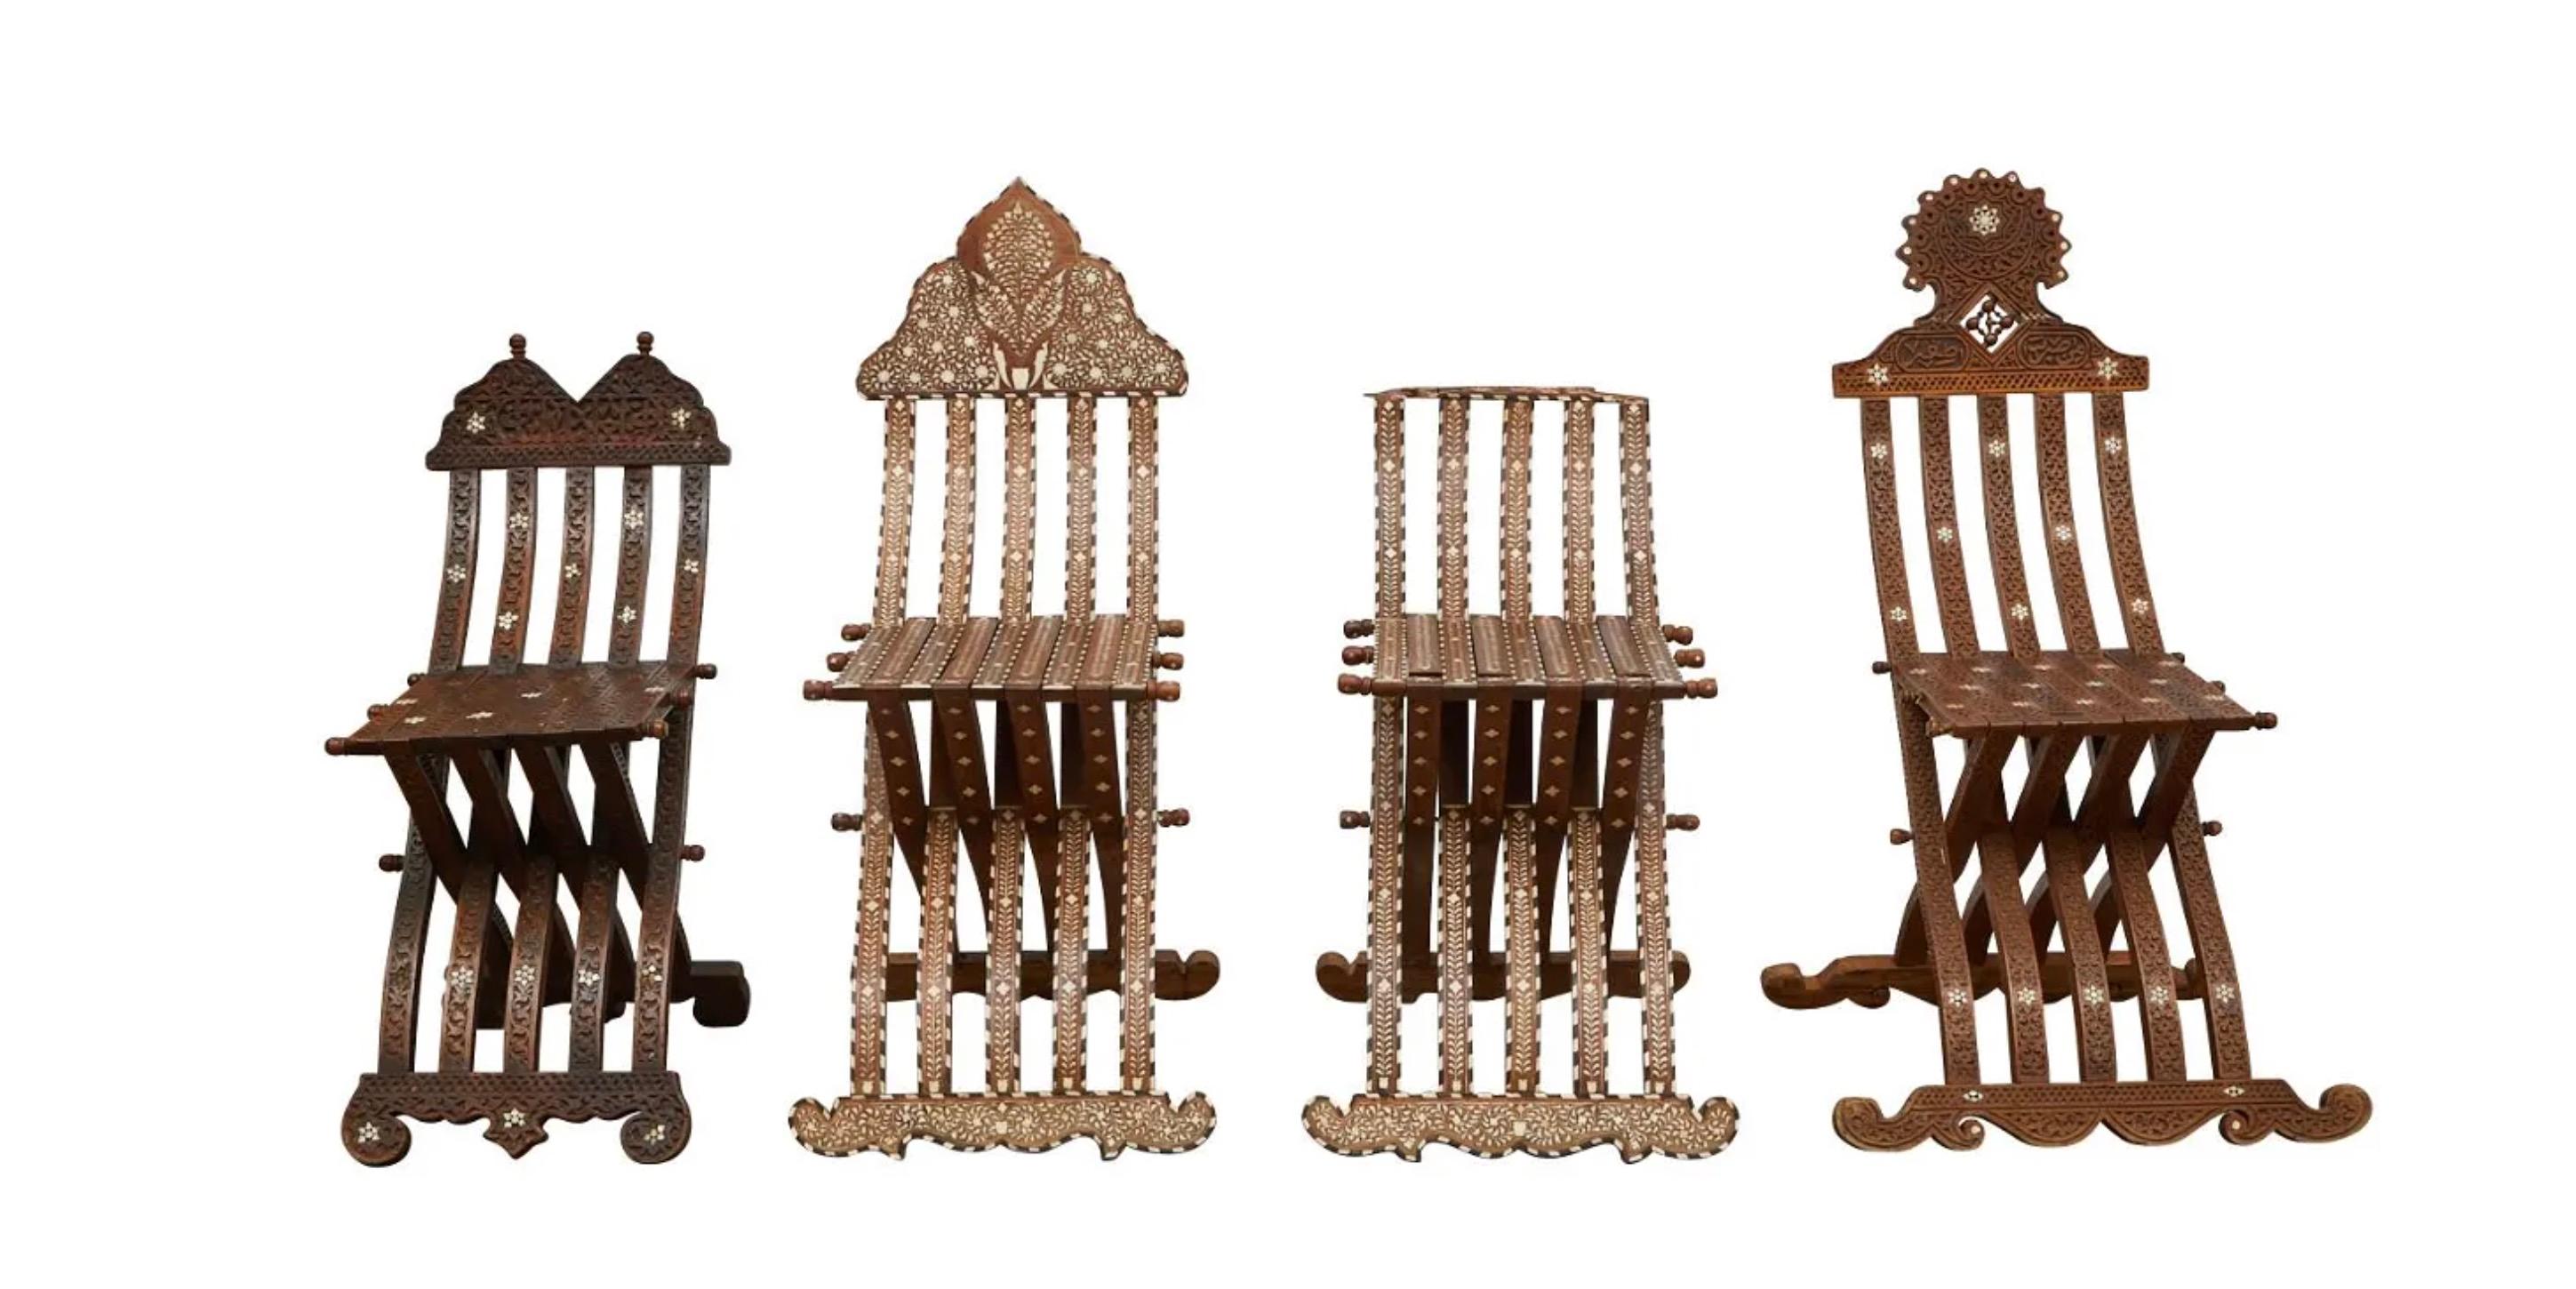 Group of four Syrian mother of pearl inlaid wooden folding scribe chairs including one matching pair. The carved wood is inlaid with intricate geometric and floral designs of mother of pearl with the intarsia method.

Provenance: From the Estate